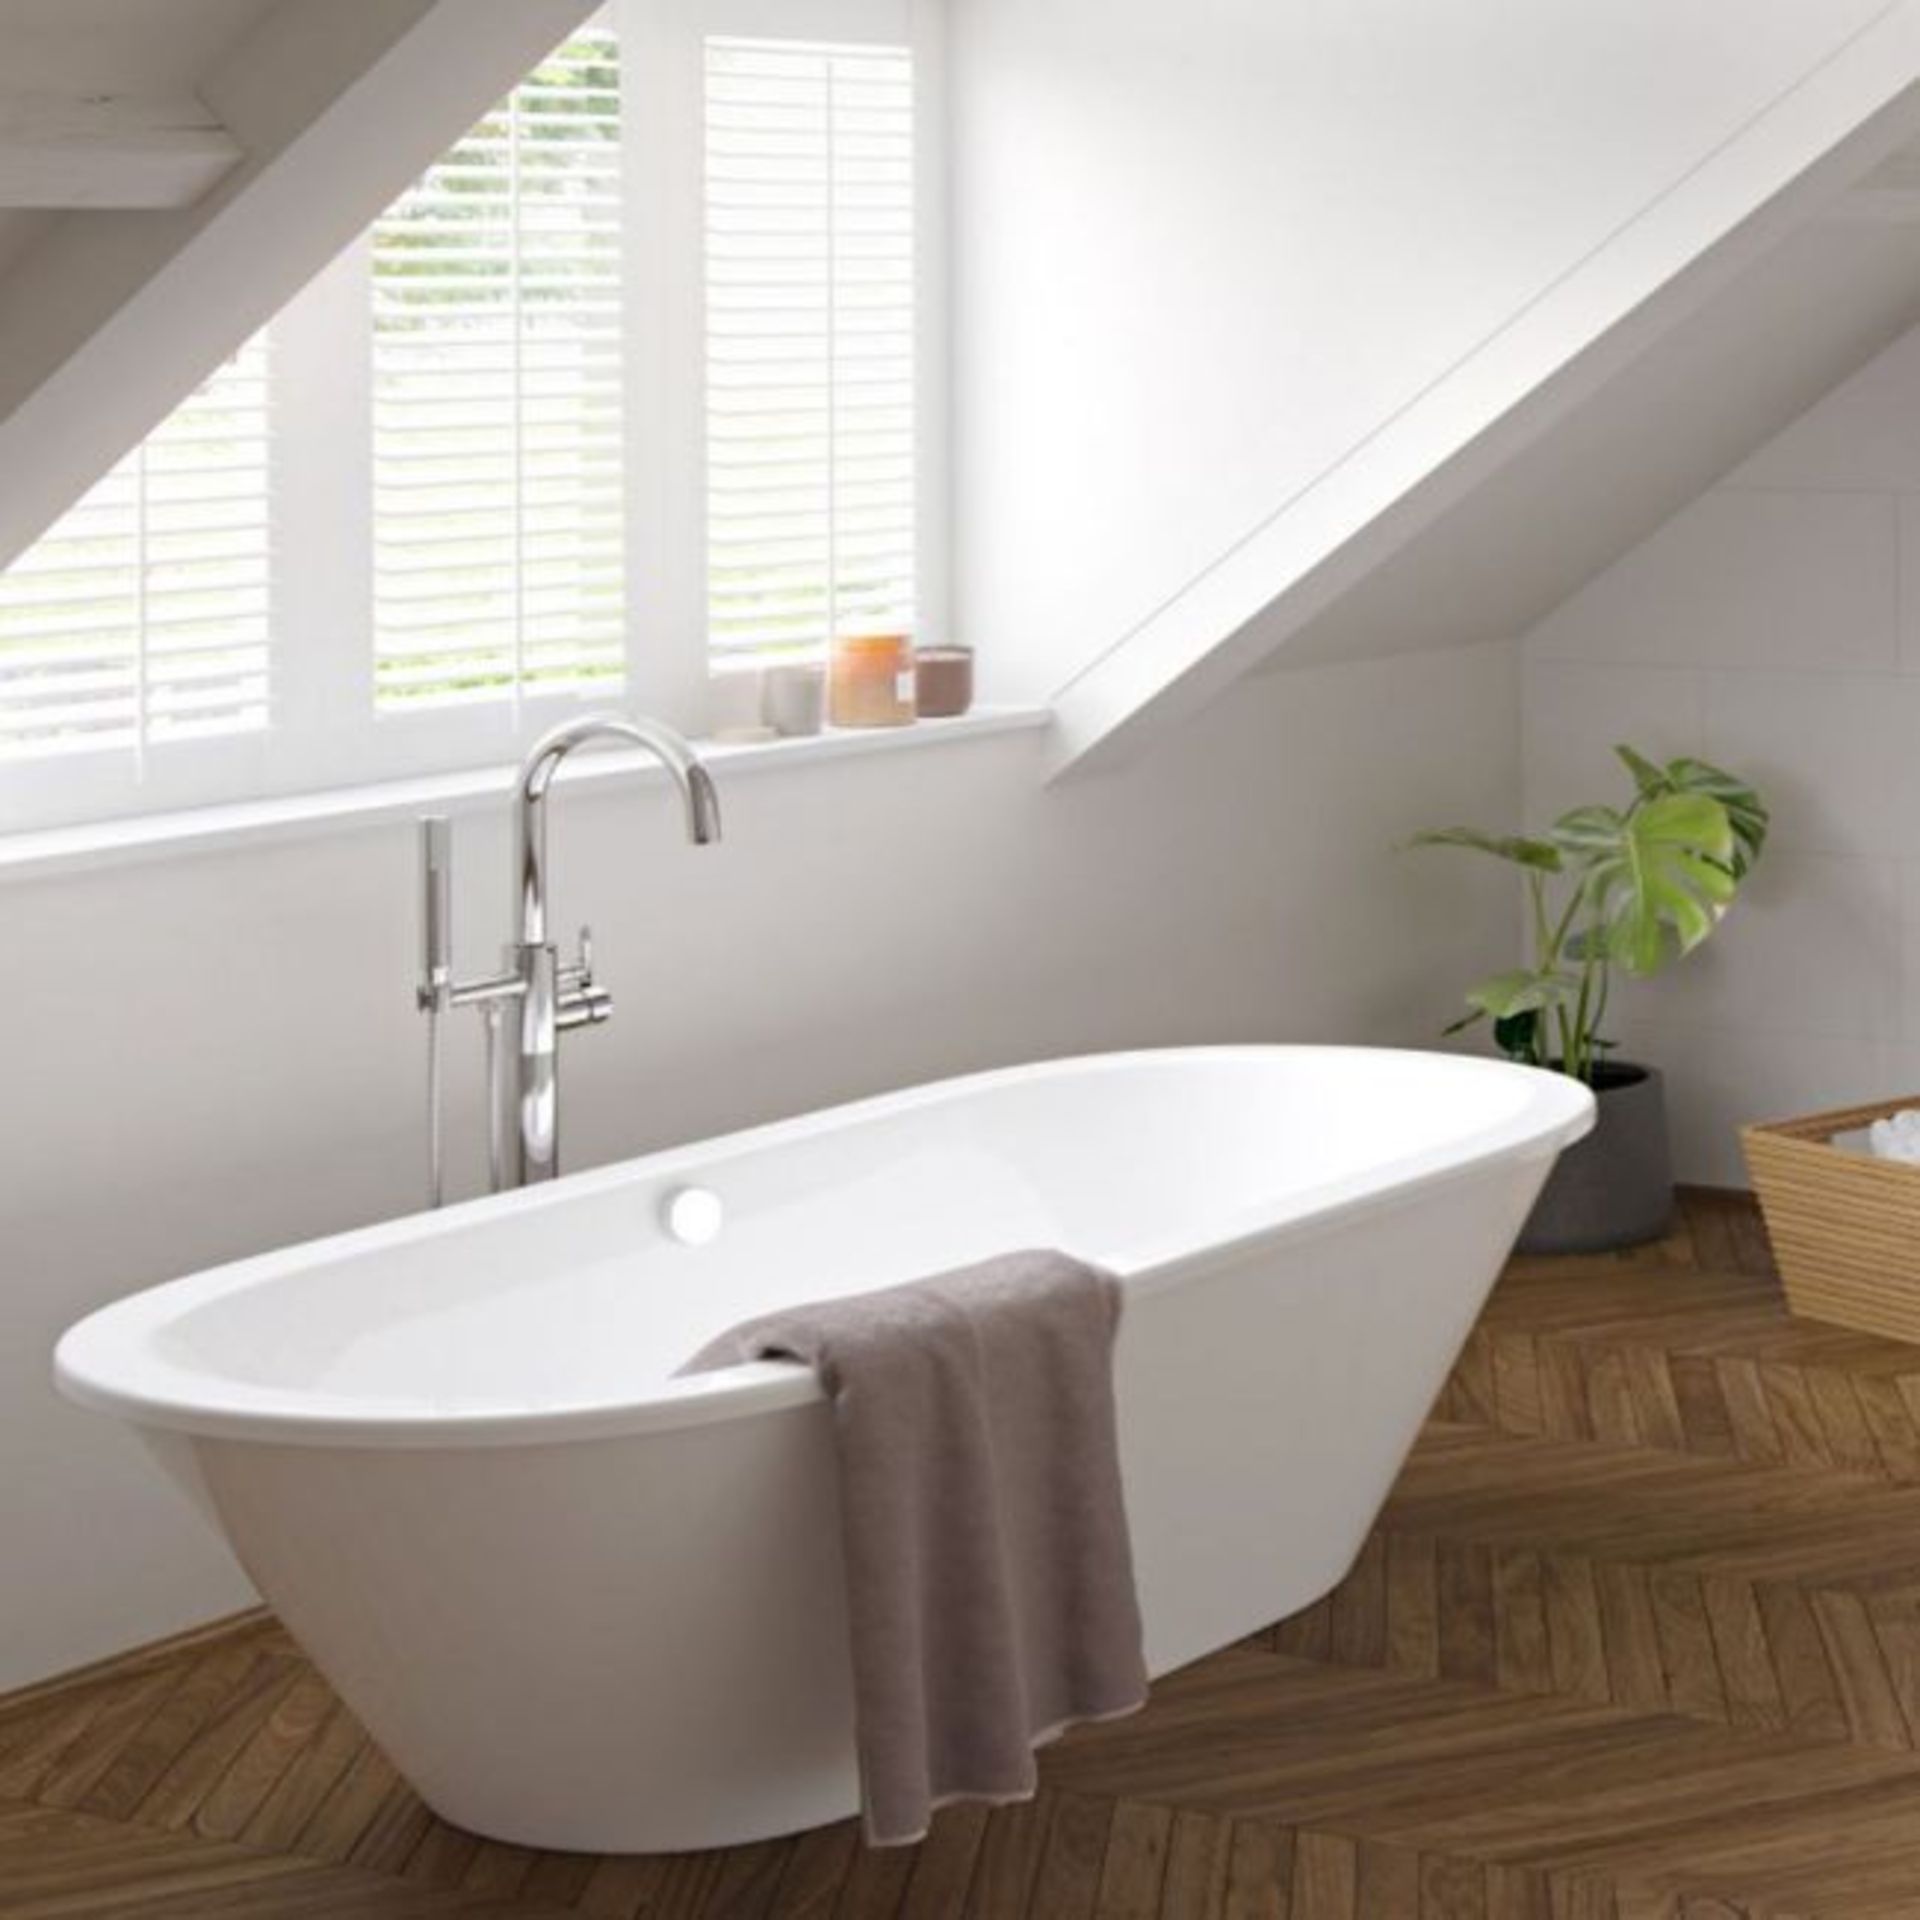 New (S4) Savoy 1700 mm x 755 mm Double Ended White Freestanding Bath. RRP £2,499.The Savoy Doub...